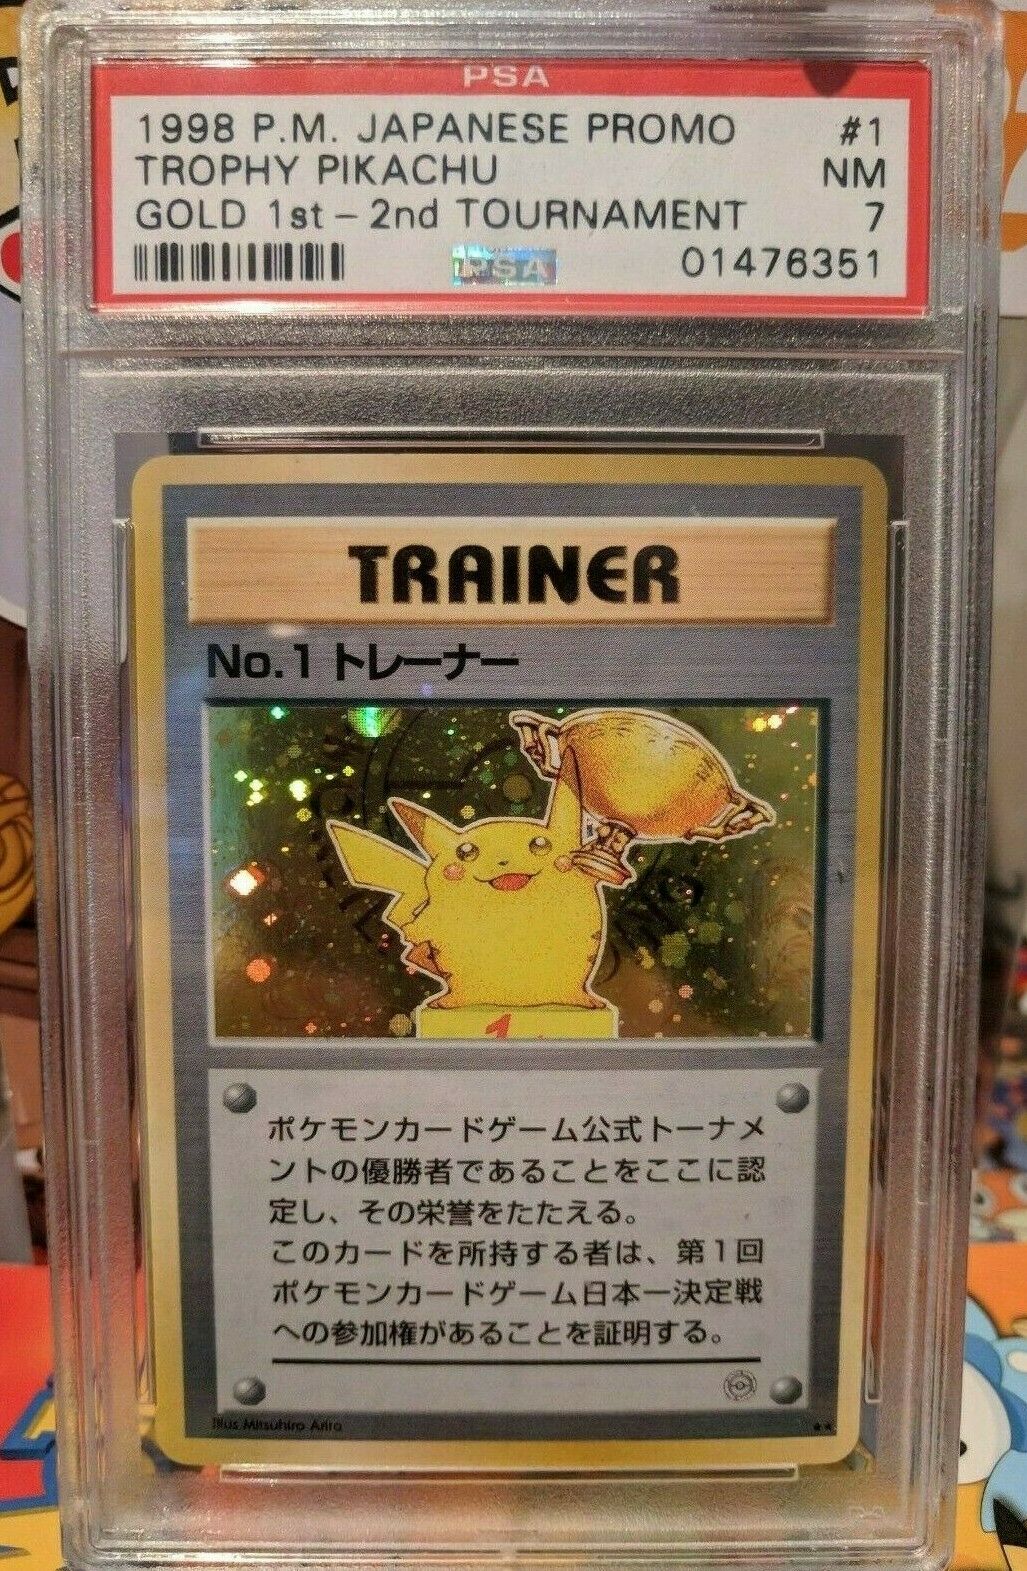 Five Of The Most Valuable And Expensive Pokémon Cards In The